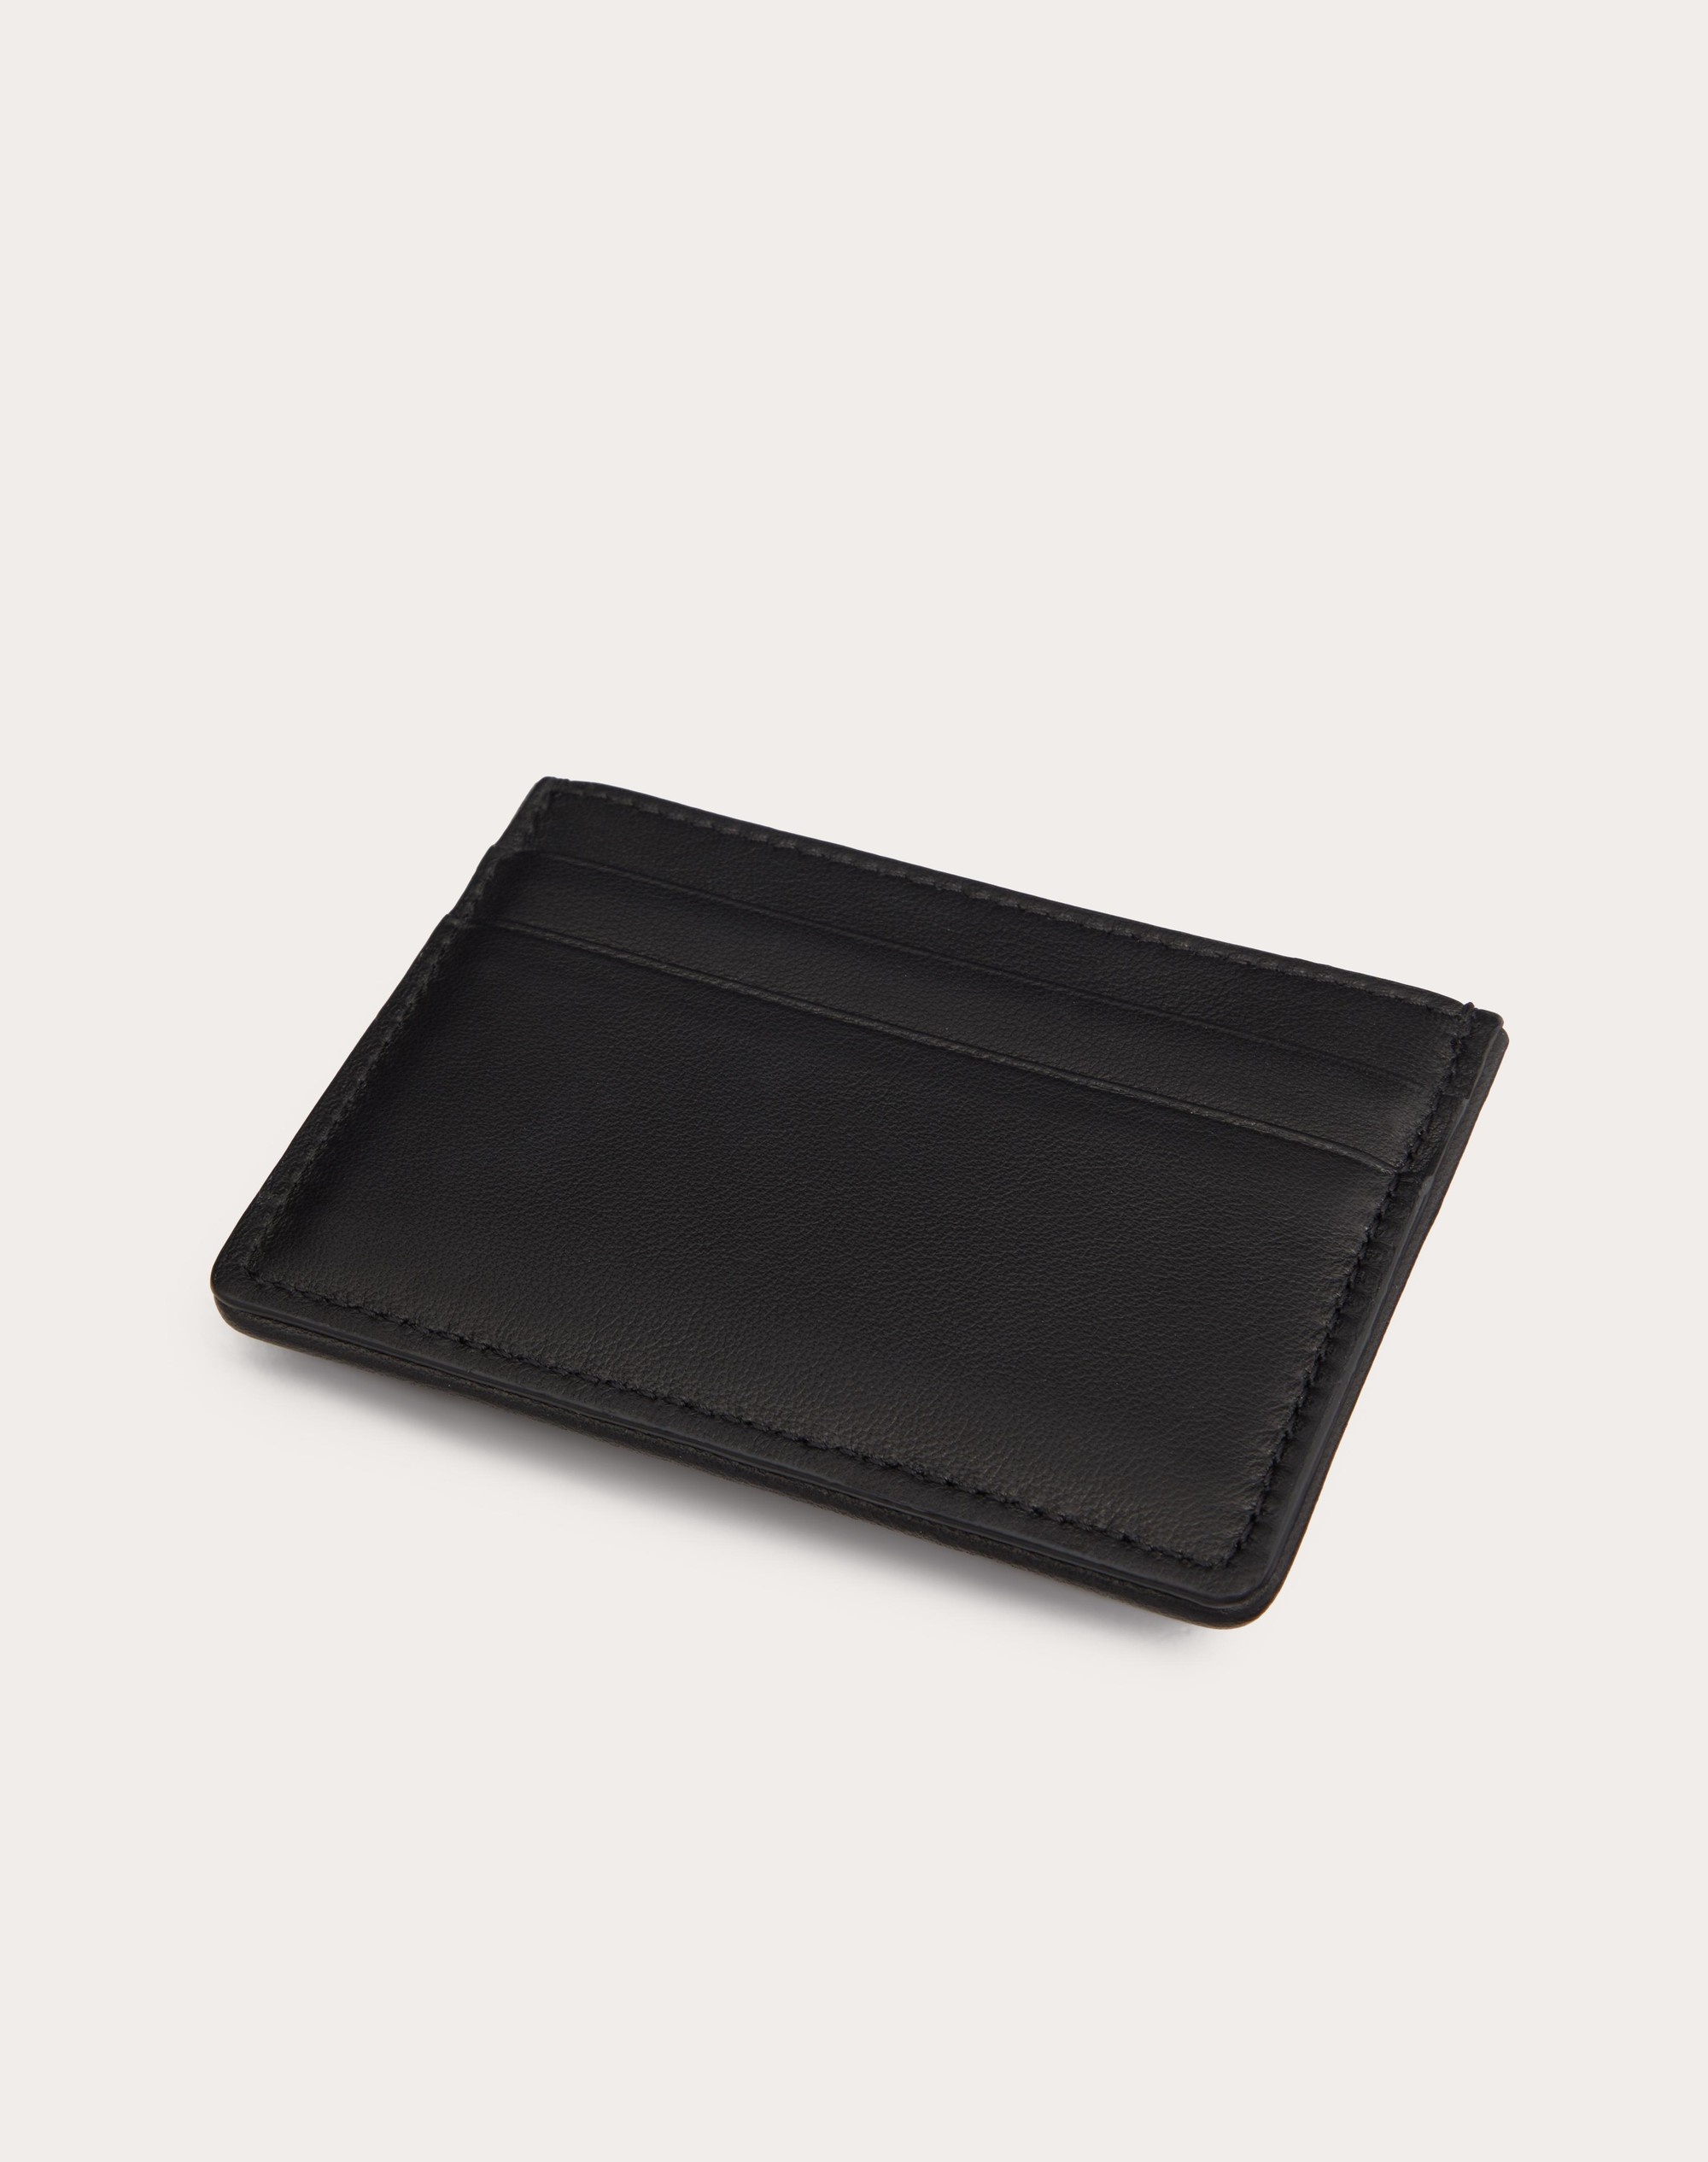 TOILE ICONOGRAPHE CARD HOLDER IN TECHNICAL FABRIC WITH LEATHER DETAILS - 3